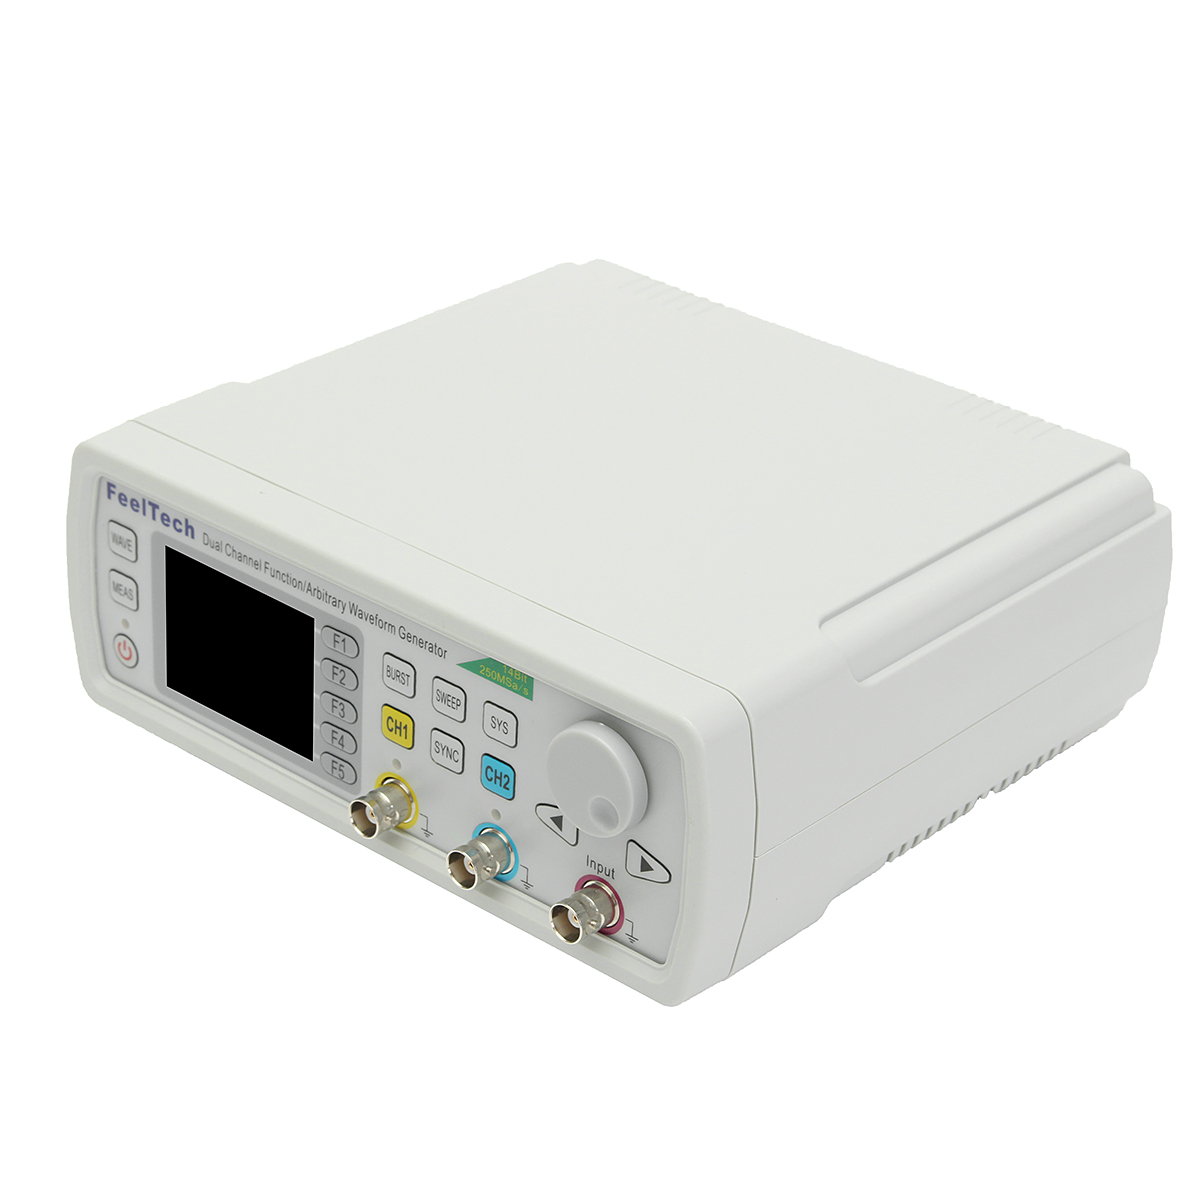 FY6600 Digital 12-60MHz Dual Channel DDS Function Arbitrary Waveform Signal Generator Frequency Meter 13